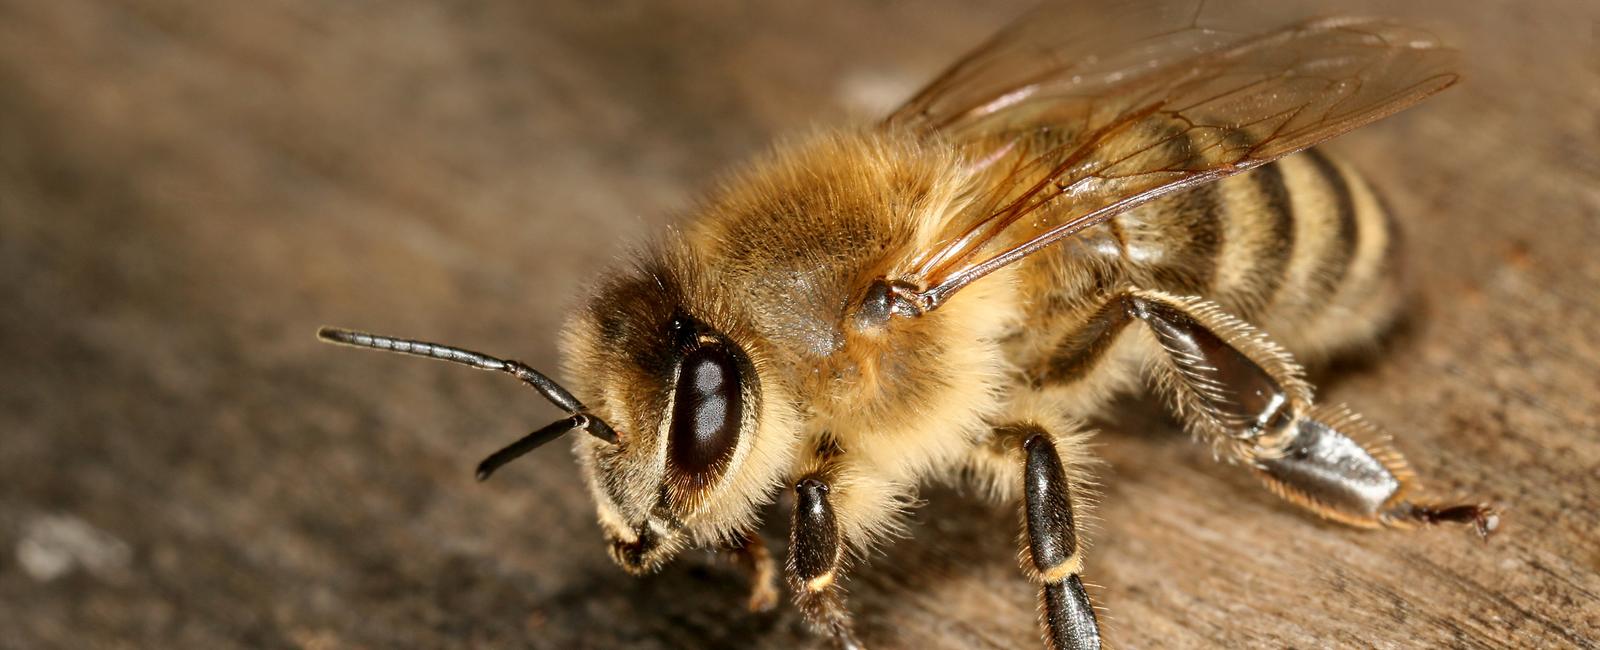 Bees have been shown to understand the concept of zero scientists discovered this after training the insects to count shapes following previous research that revealed they can count to four